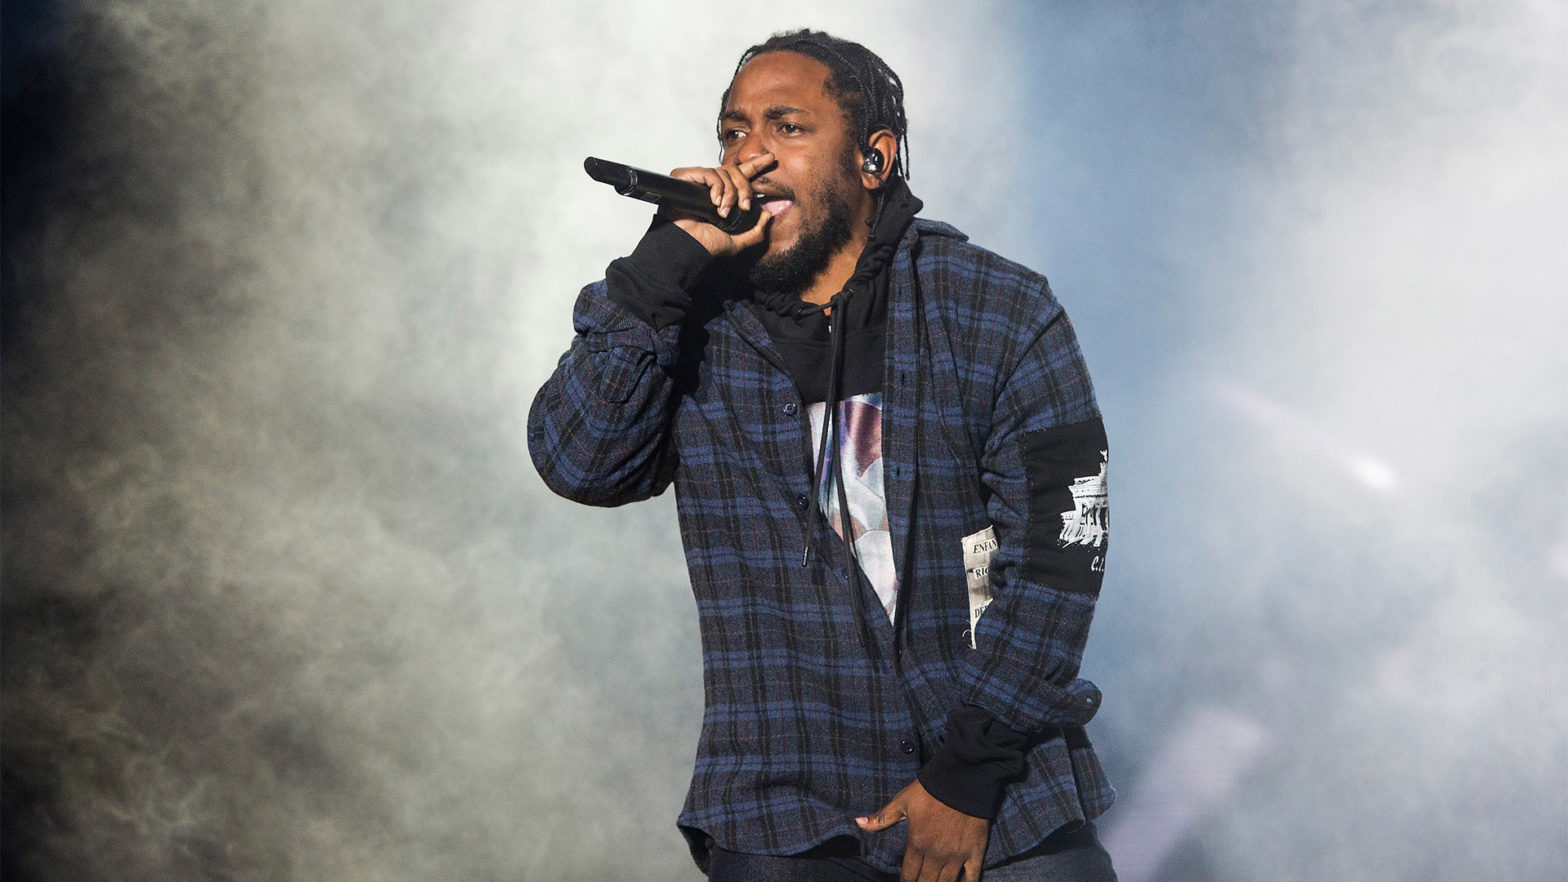 From Mimicking Kendrick Lamar's Voice To Replacing Therapists, AI's Everywhere — Here's What We Know